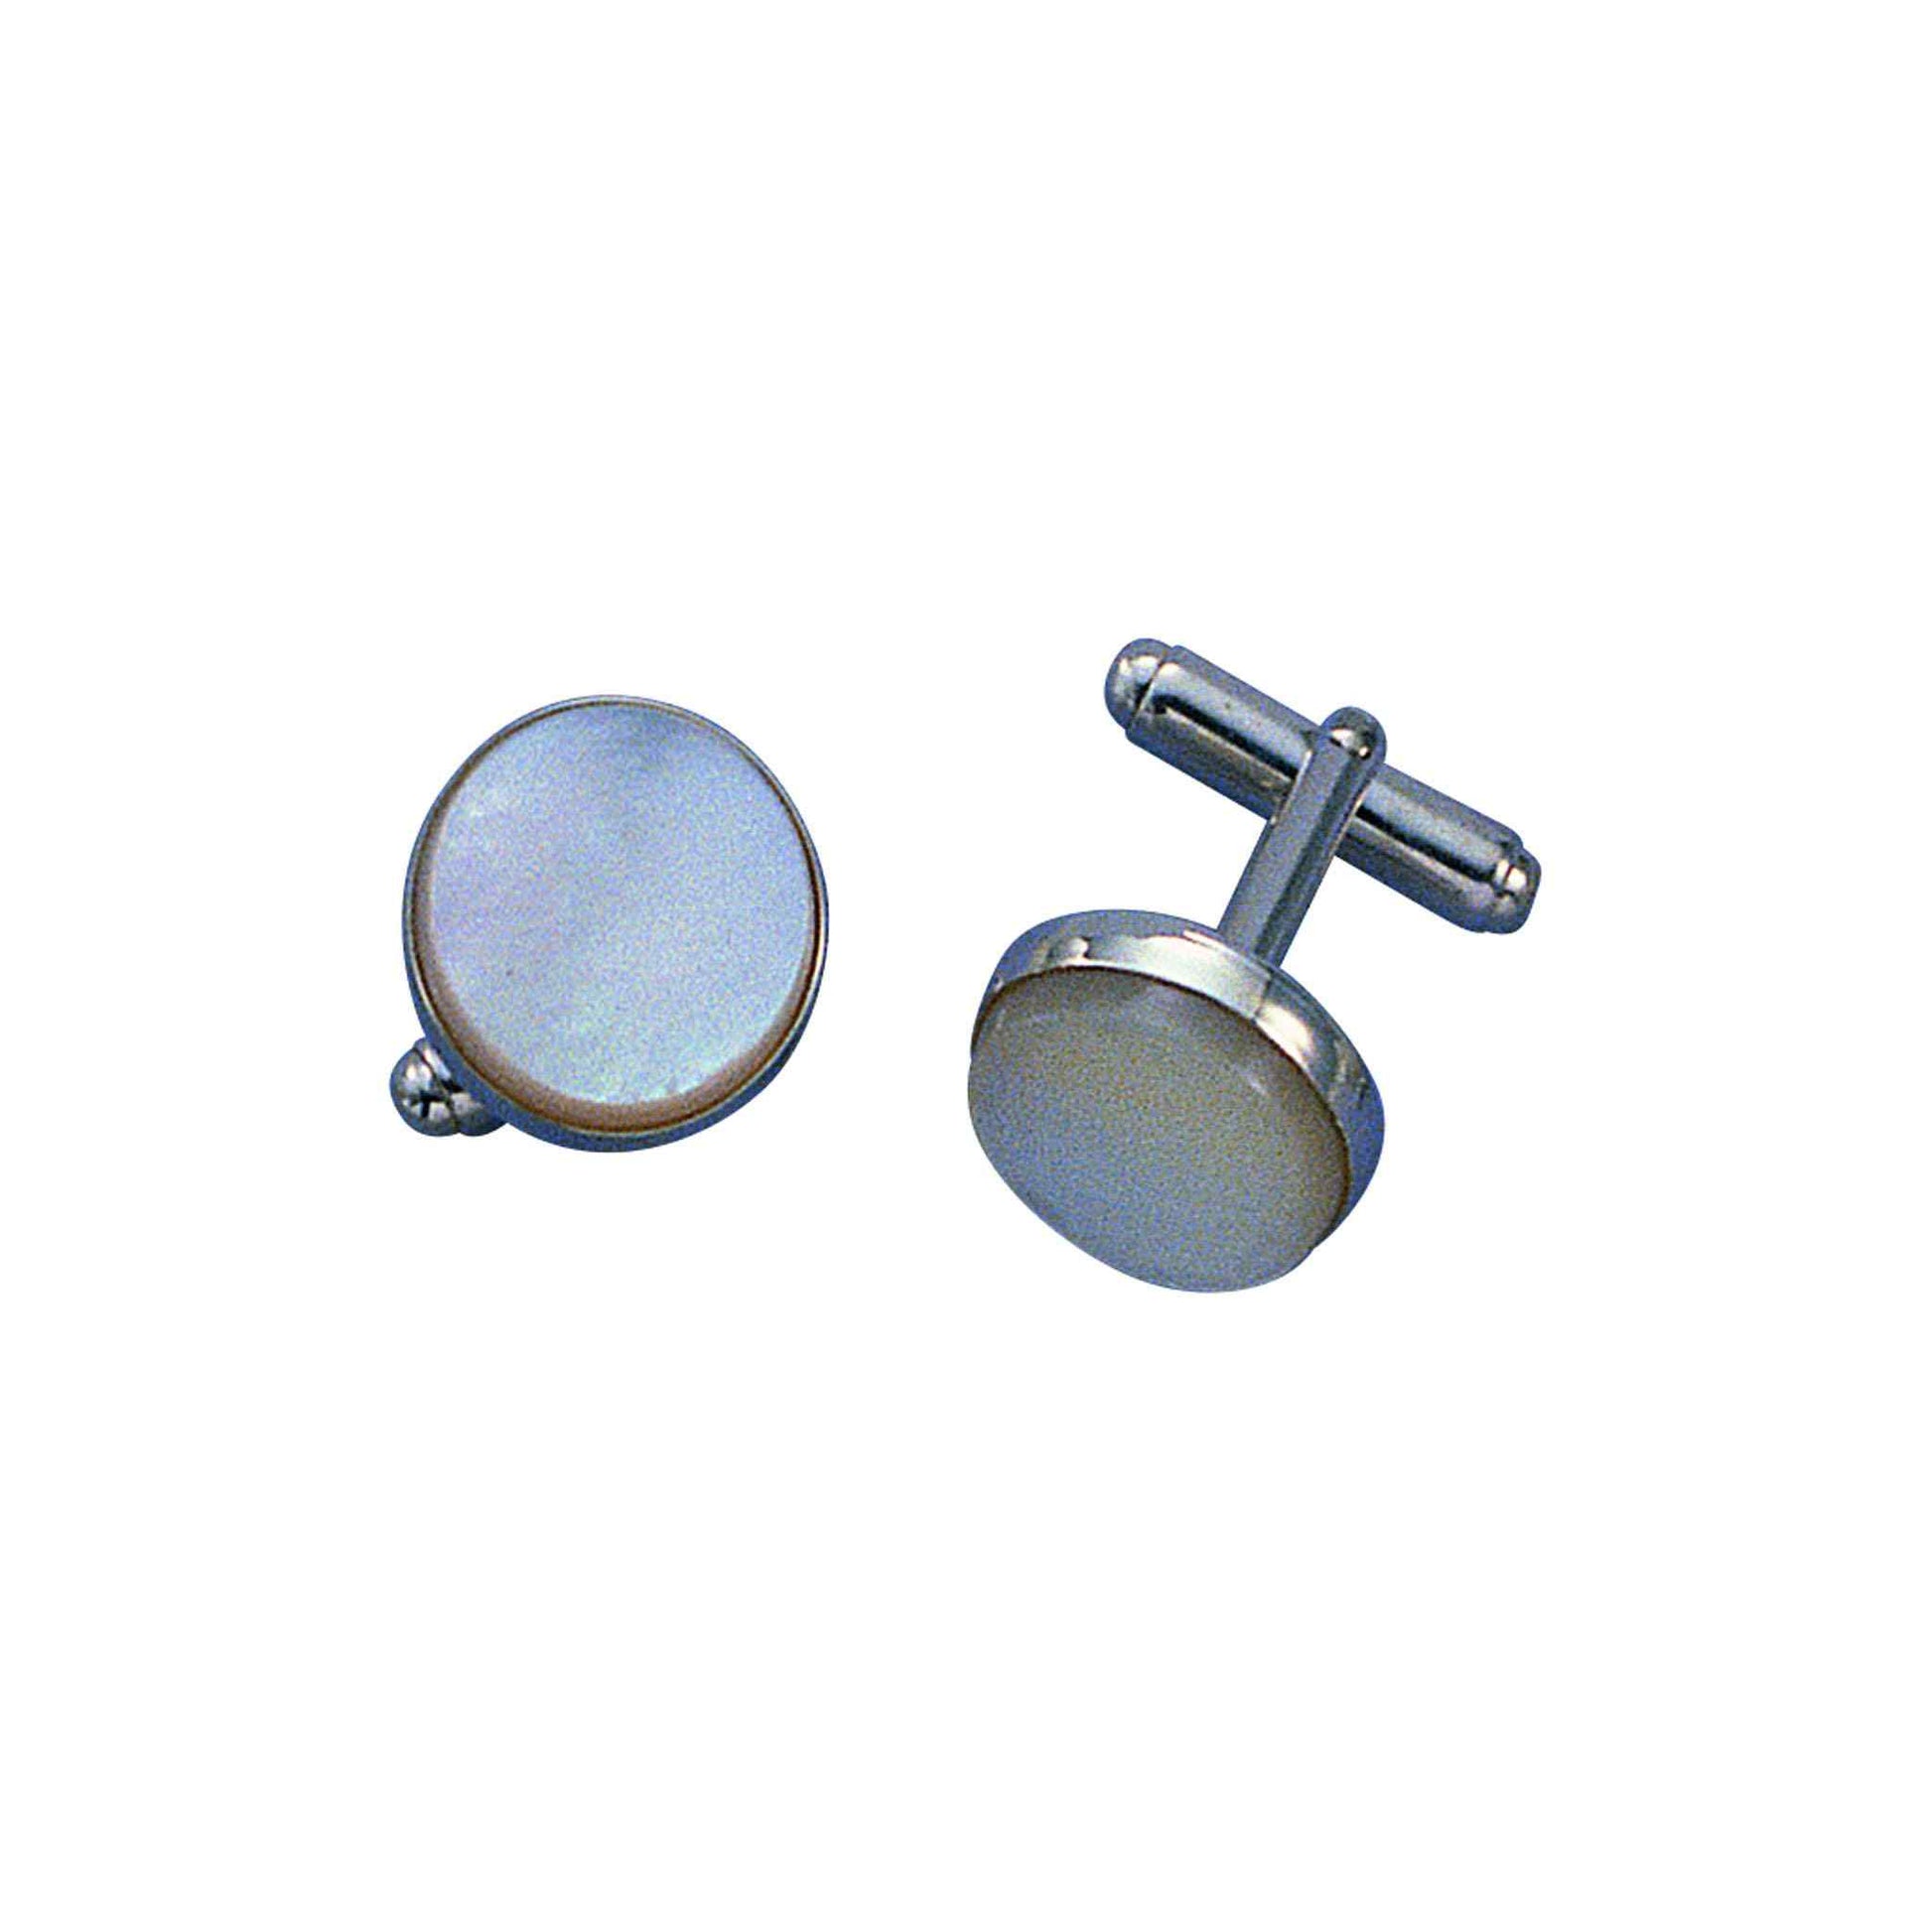 A sterling silver round cufflinks with mother of pearl displayed on a neutral white background.